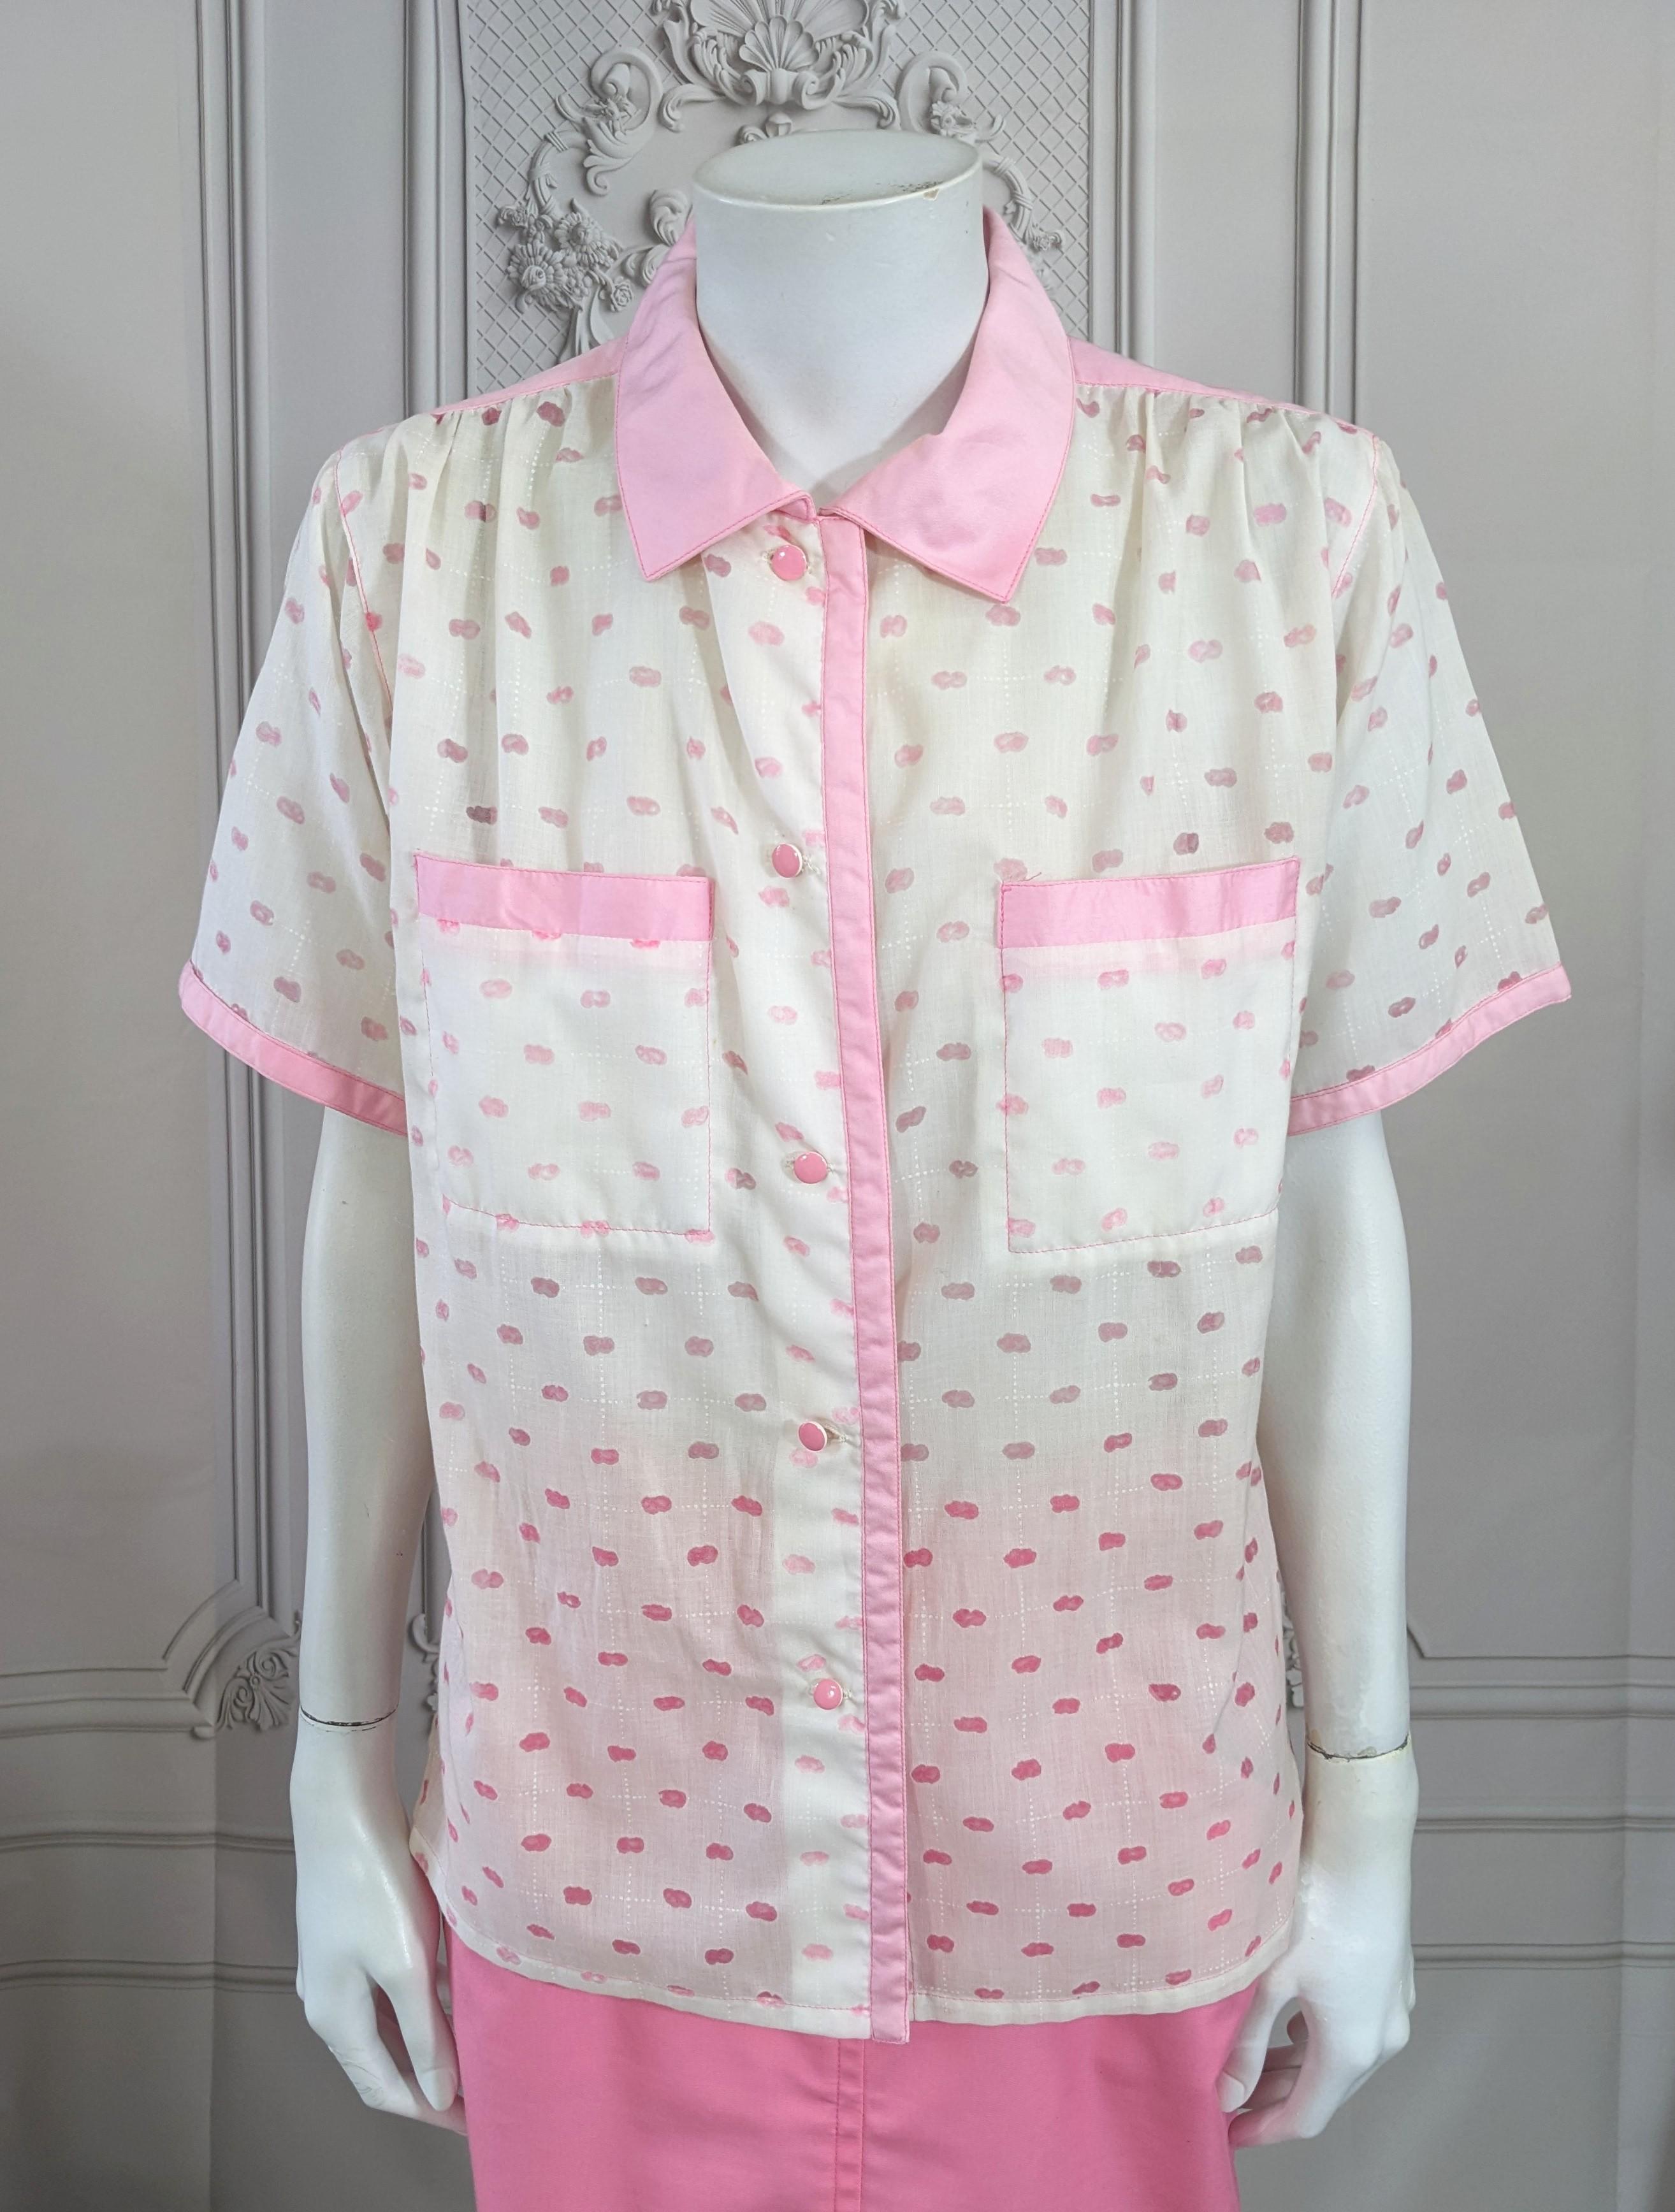 Courreges Pink Cloud Blouse from the 1980's with amazing voided textile. The pink cloud motifs are sheer on the white ground and the blouse is trimmed in pink cotton sateen. Small size. 1980's France. Courreges size 000. 